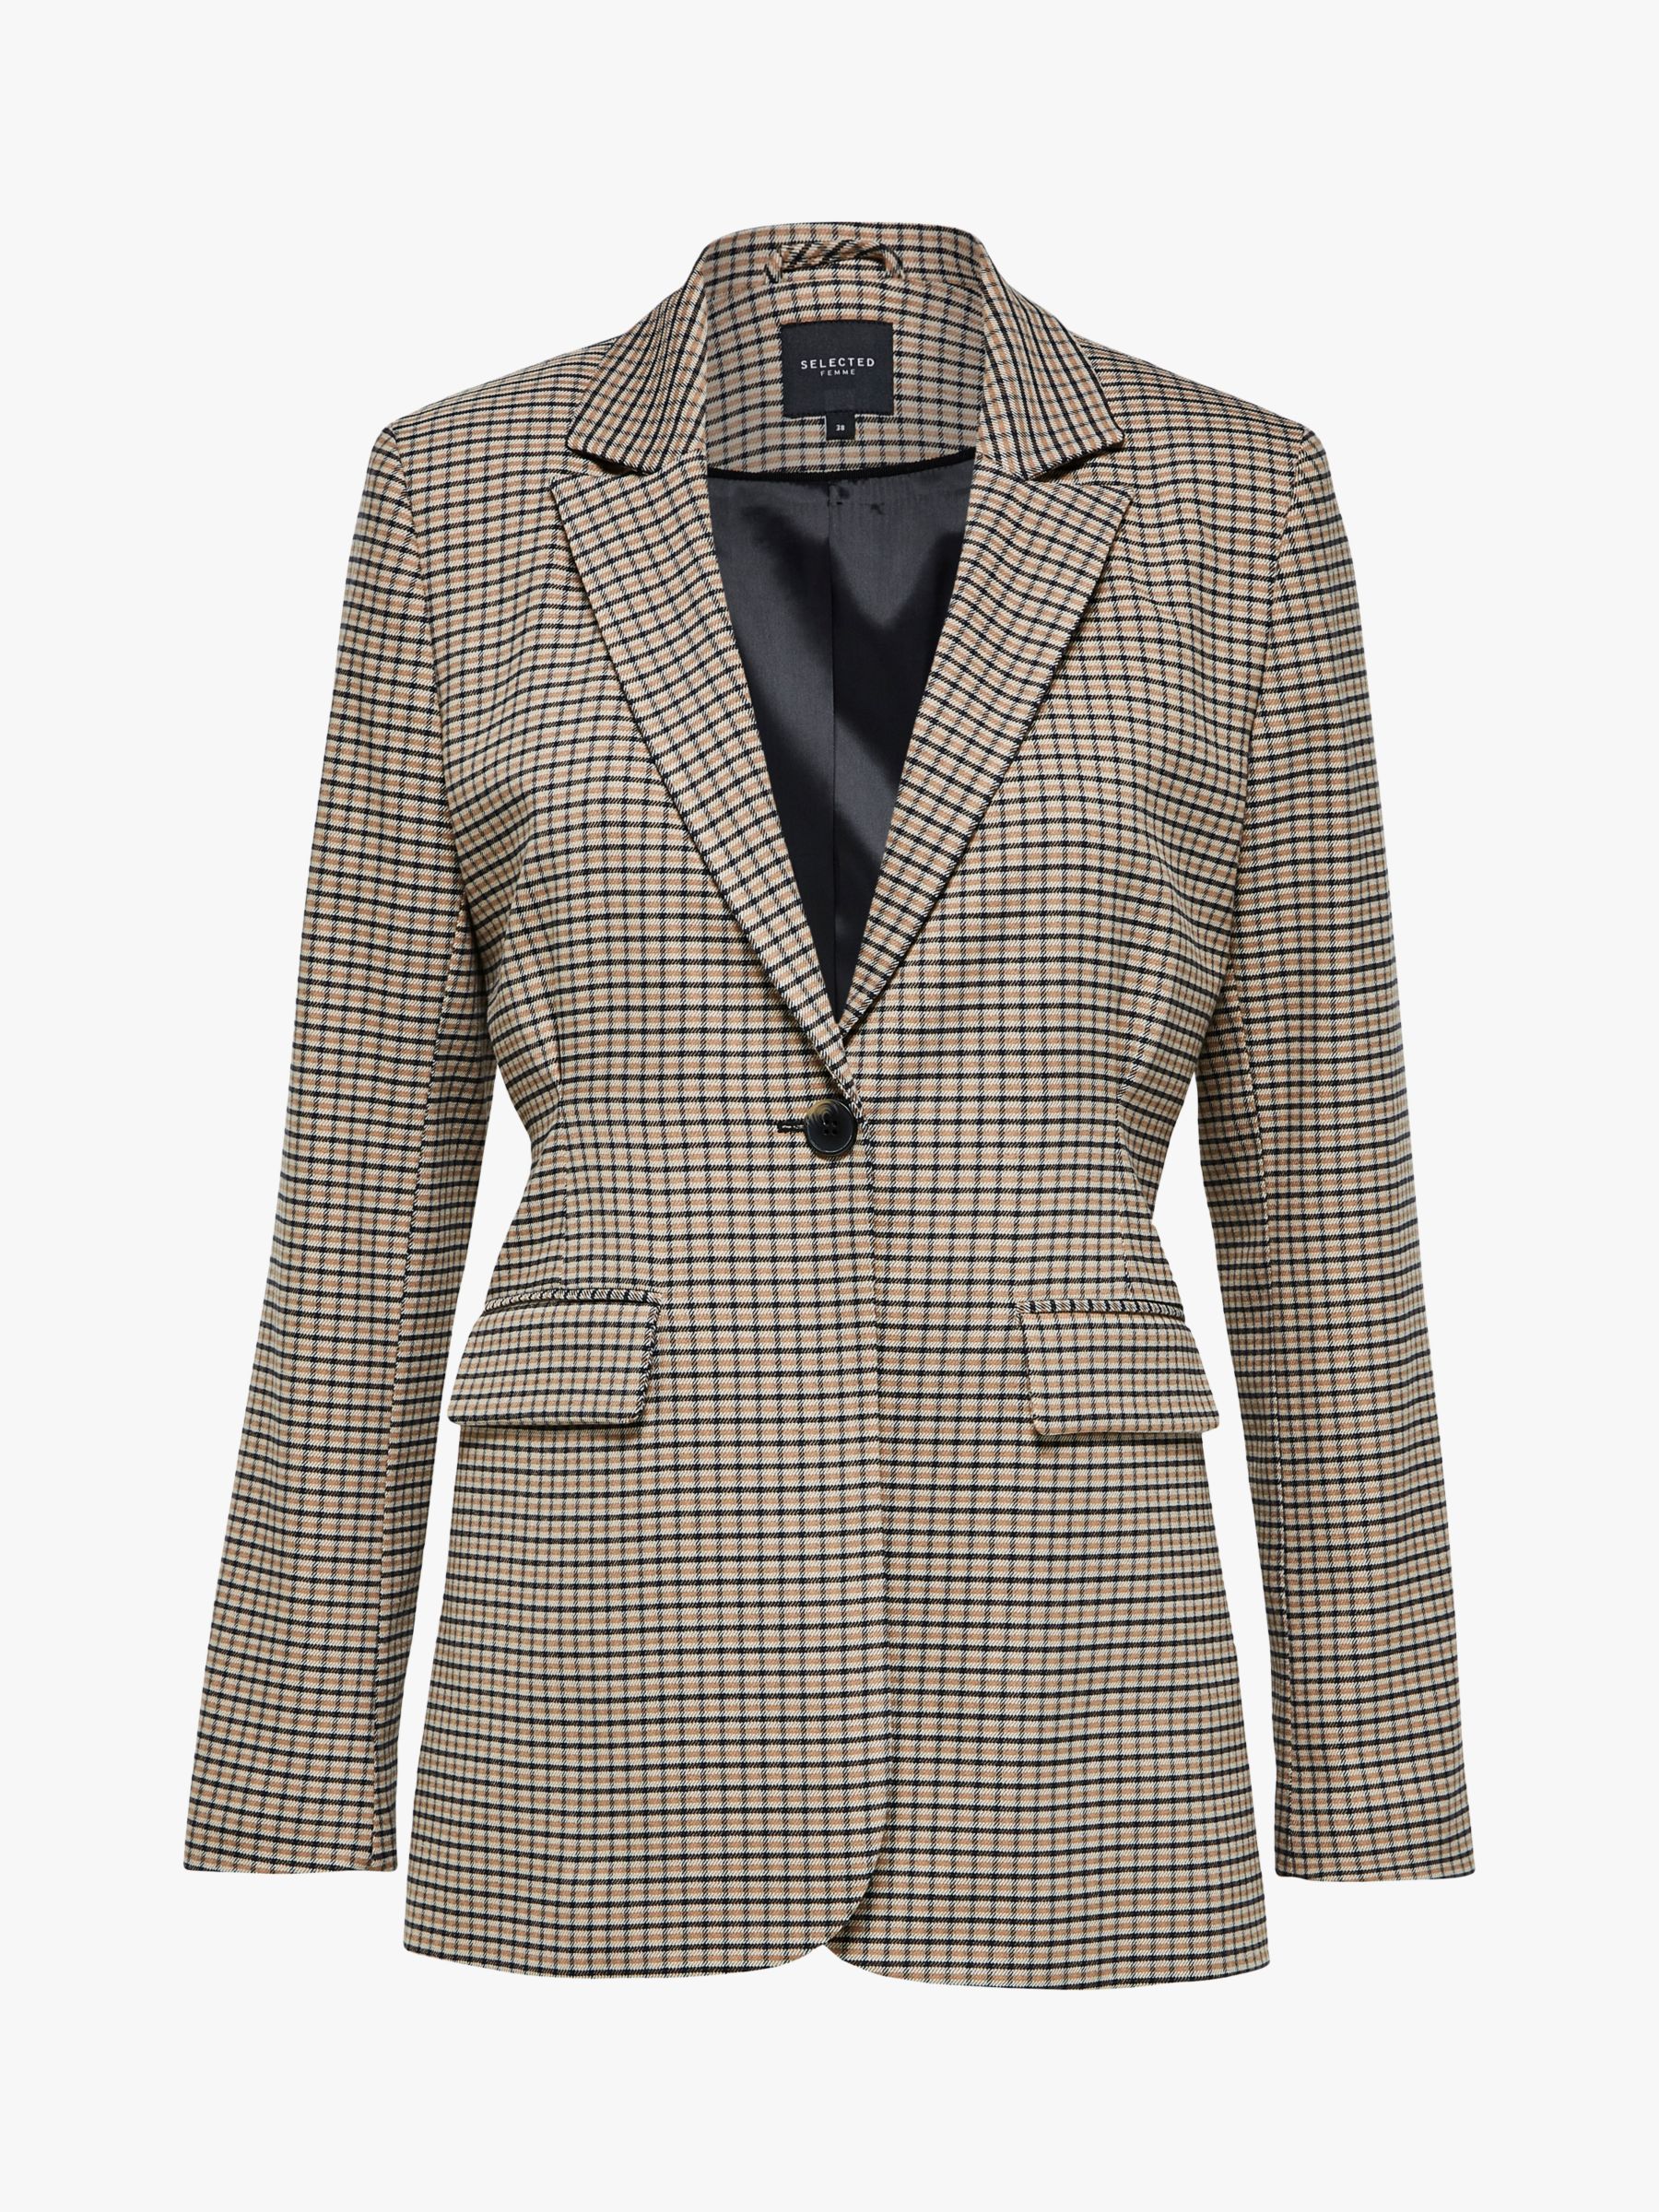 Selected Femme Margery Check Blazer, Brown at John Lewis & Partners